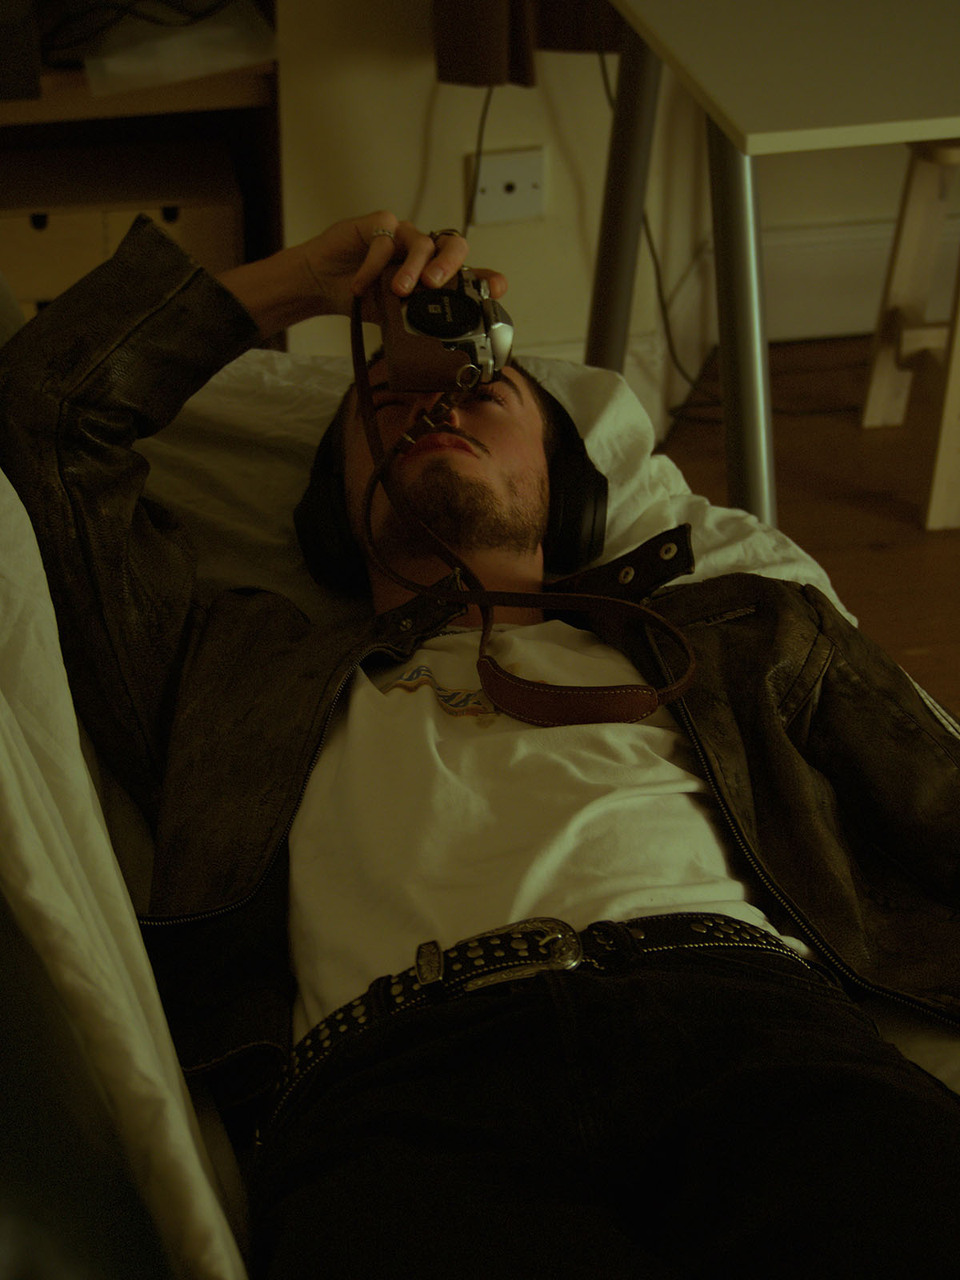 A man lies on a couch looking upwards through the viewfinder of a camera held in one hand